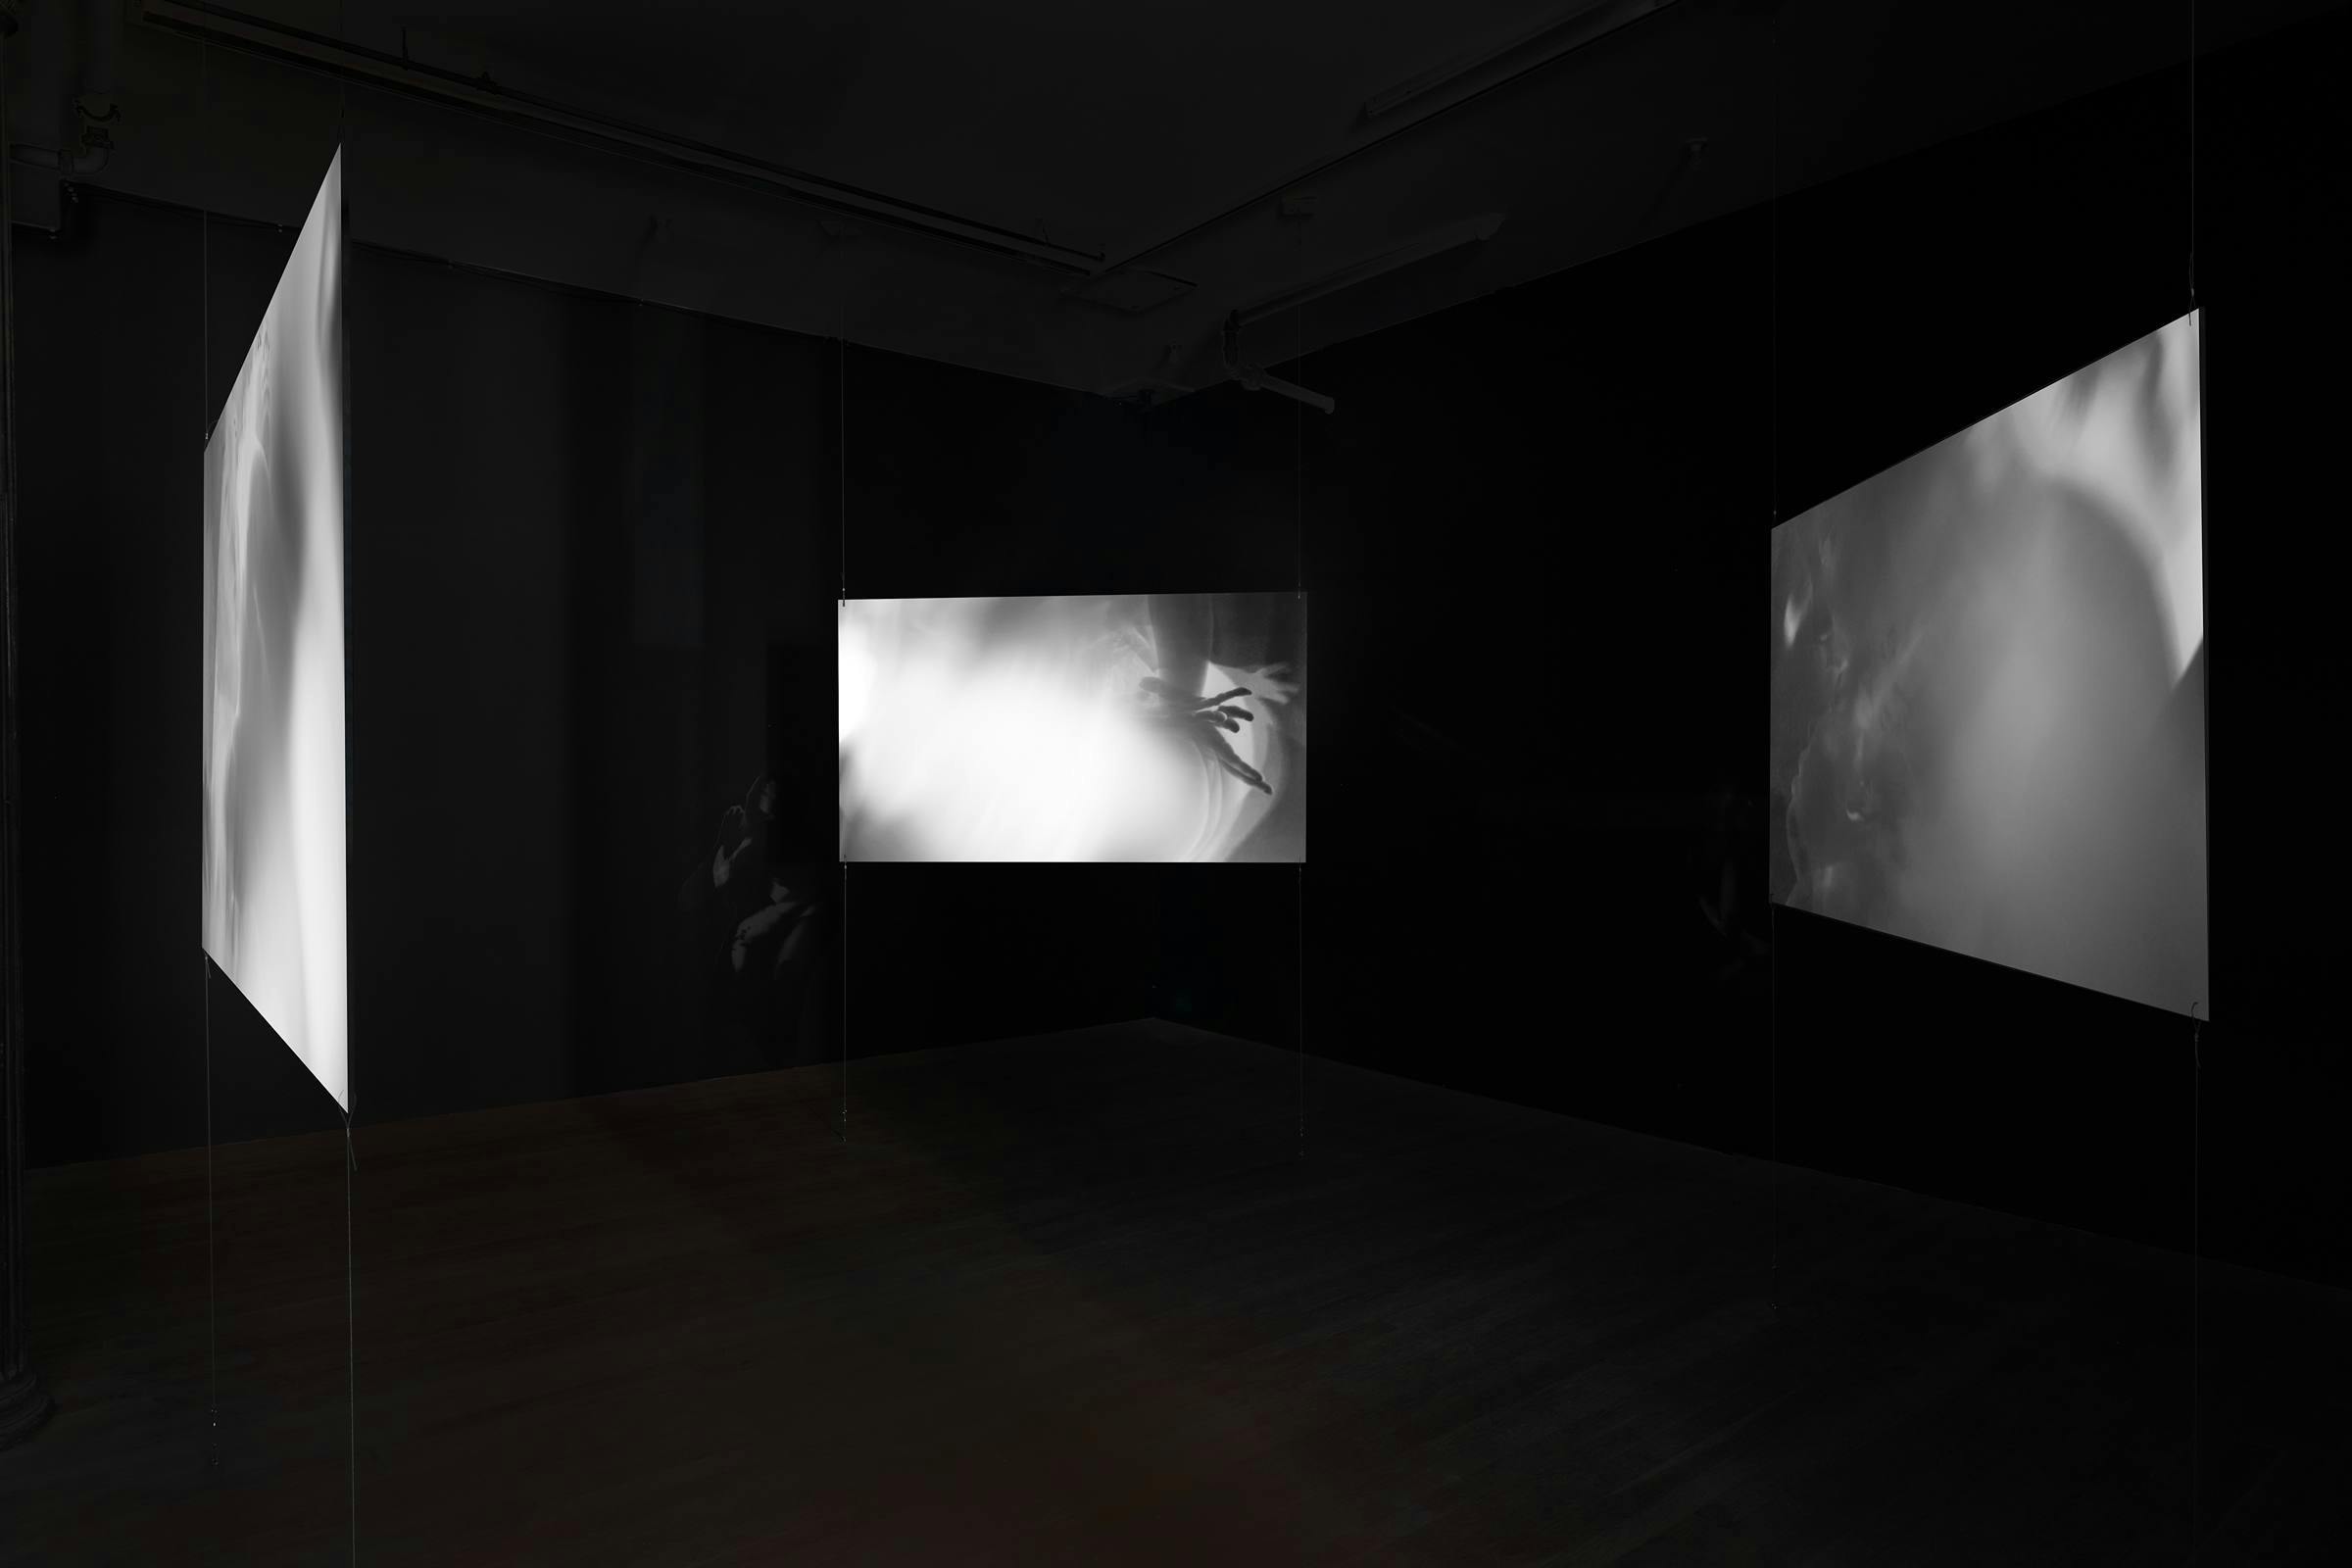 Three monochrome projection panels float in a dark room.